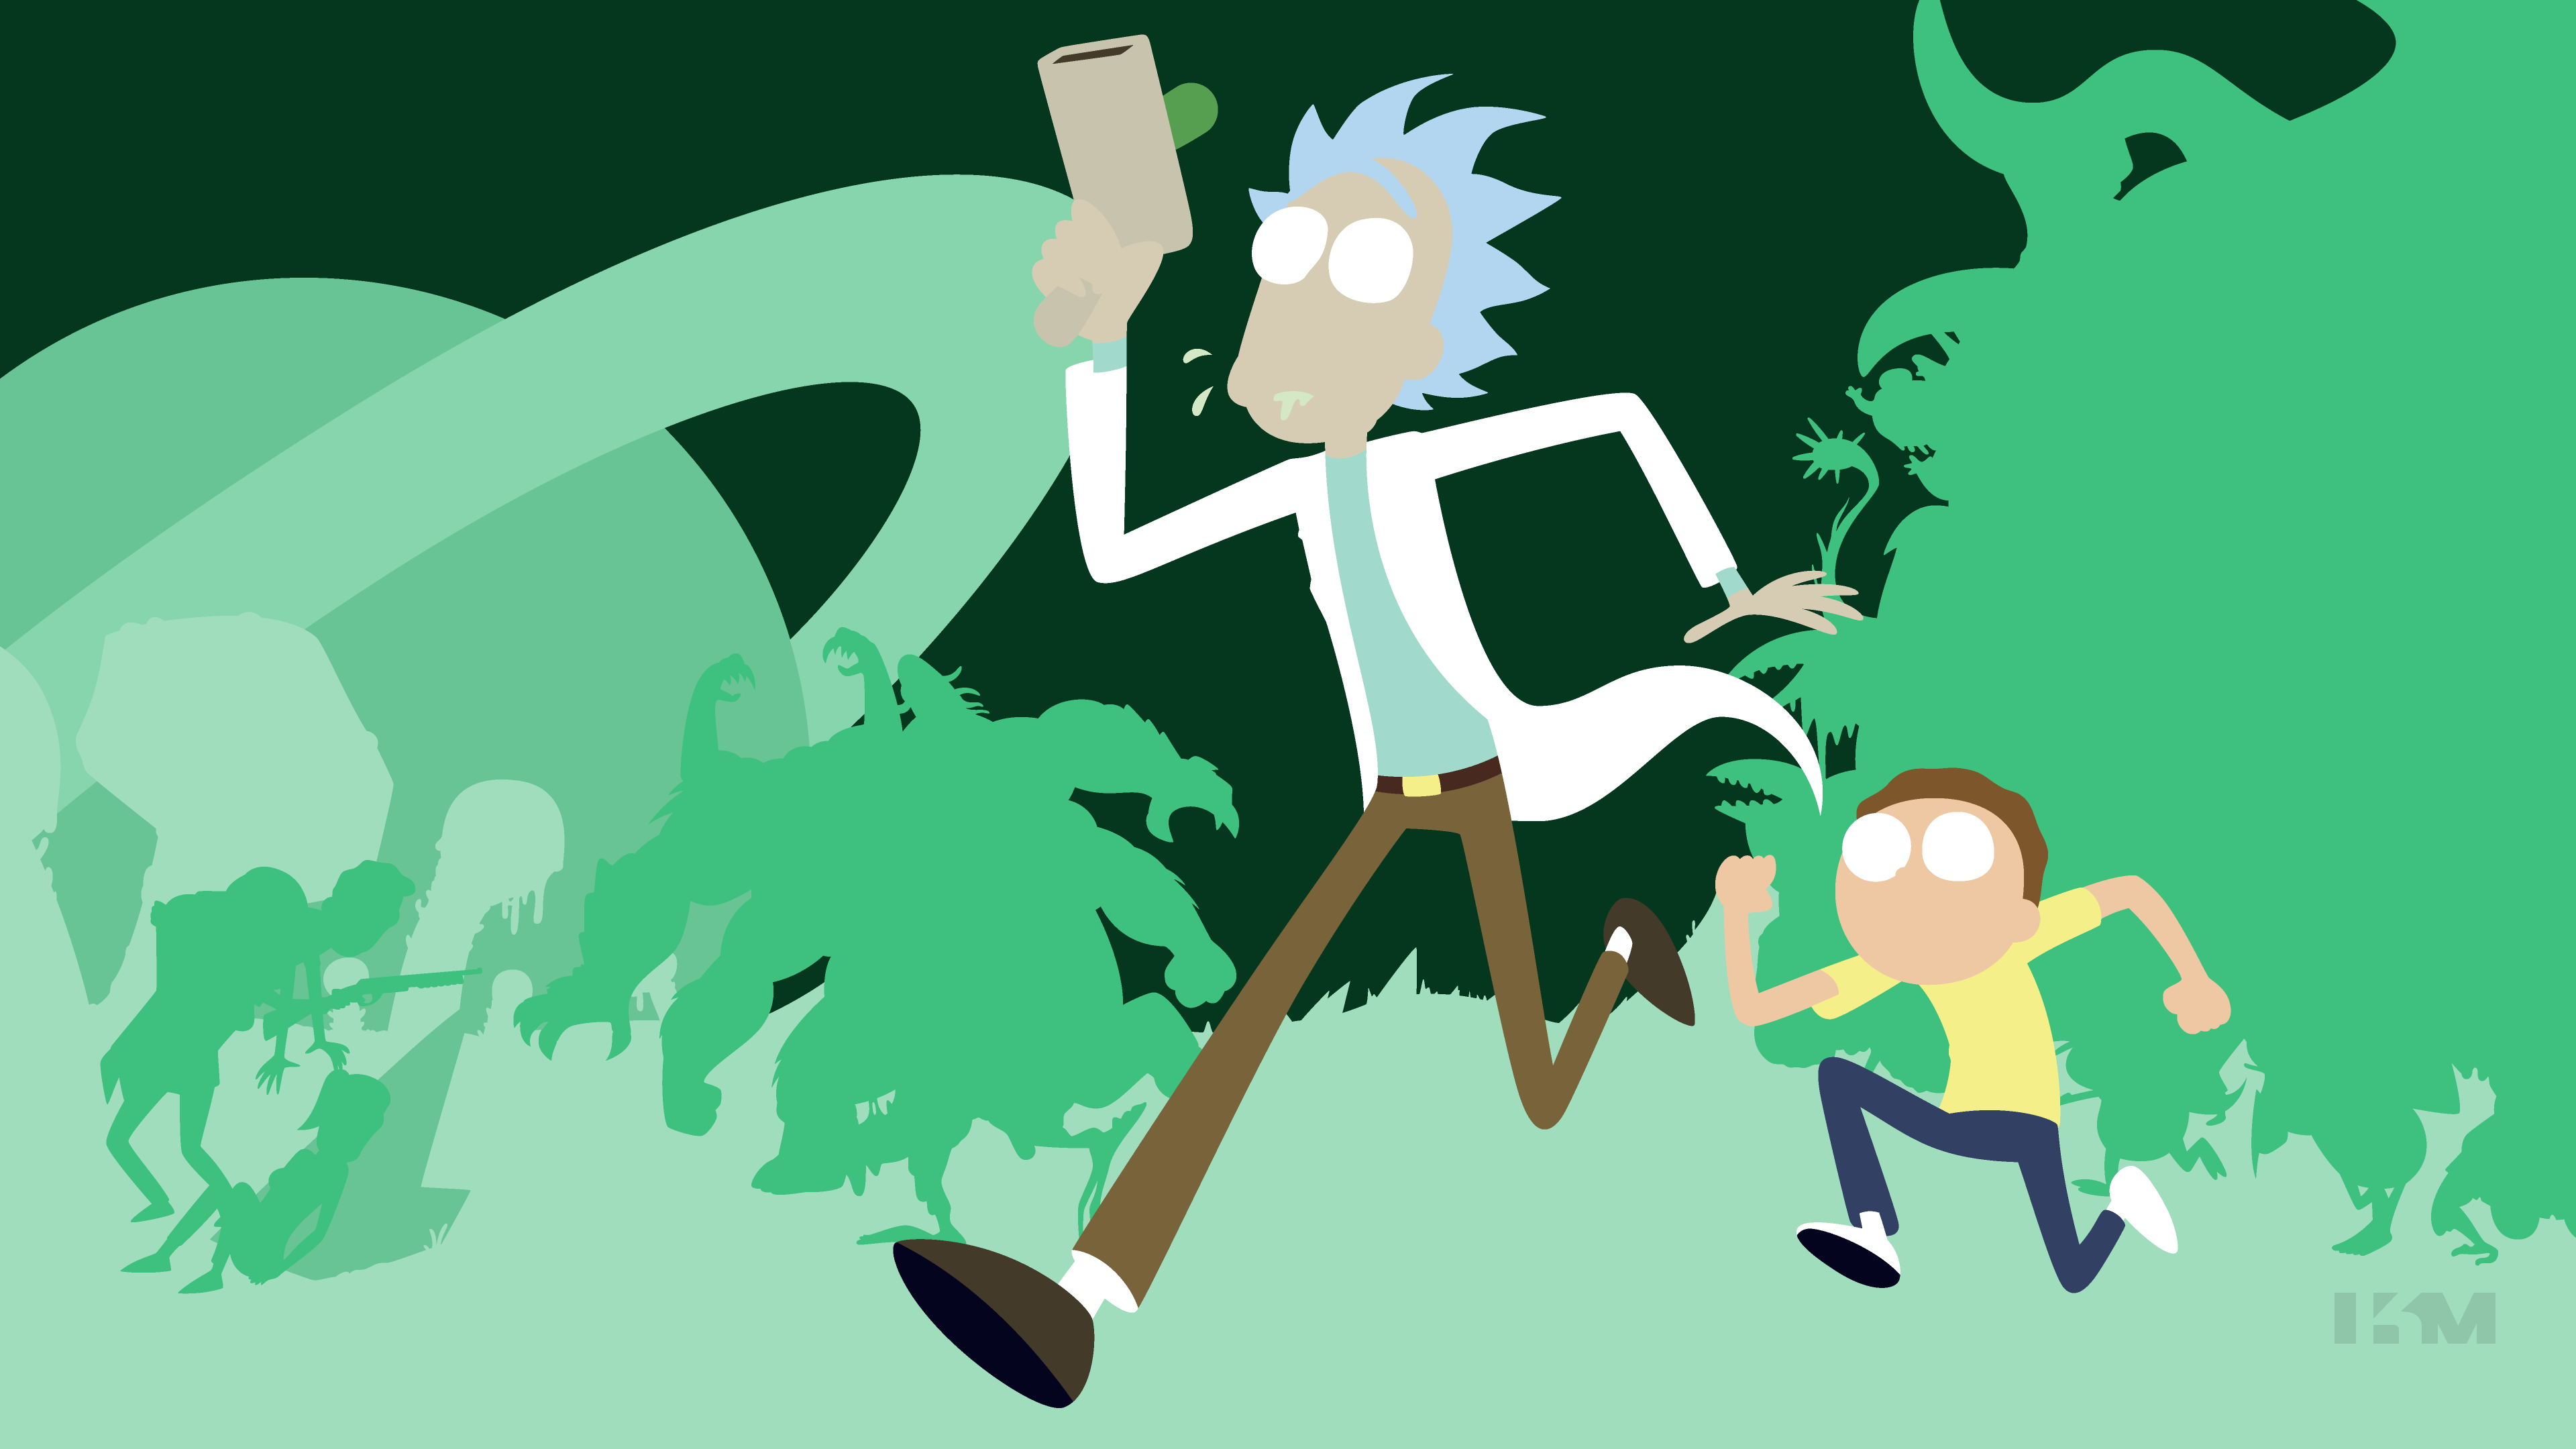 Rick and Morty by Krukmeister